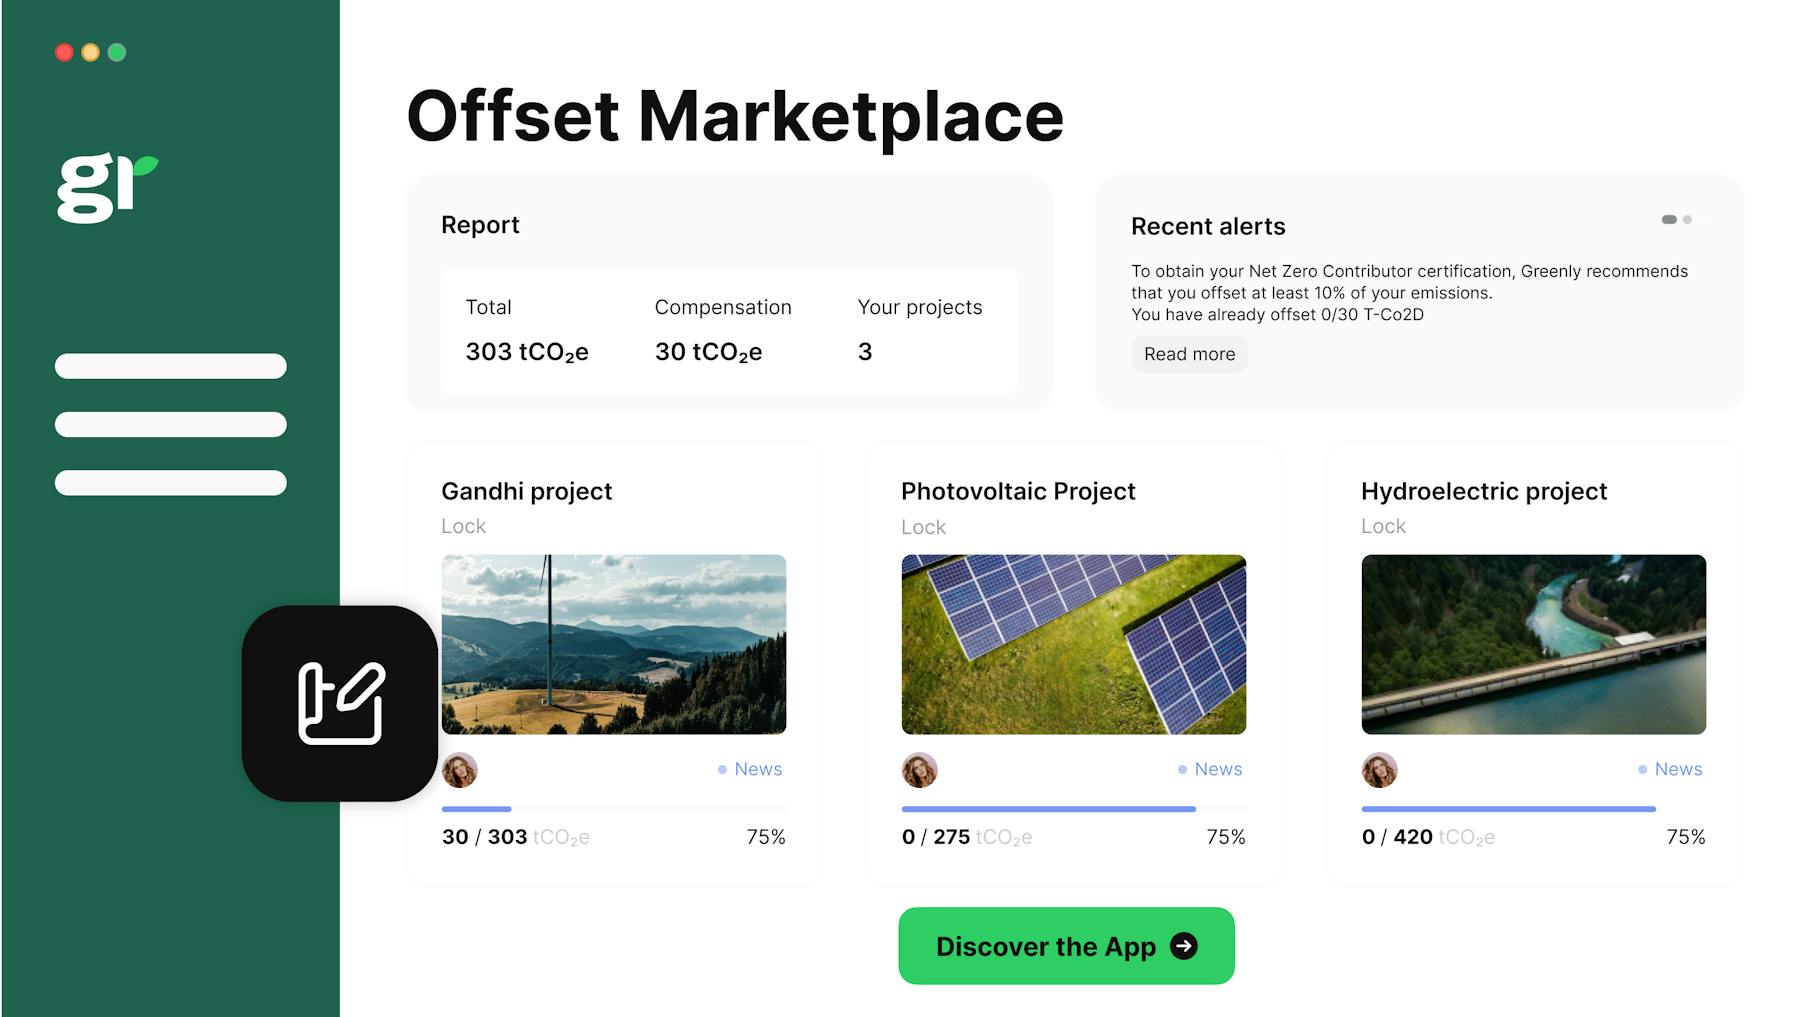 Greenly's offset marketplace application